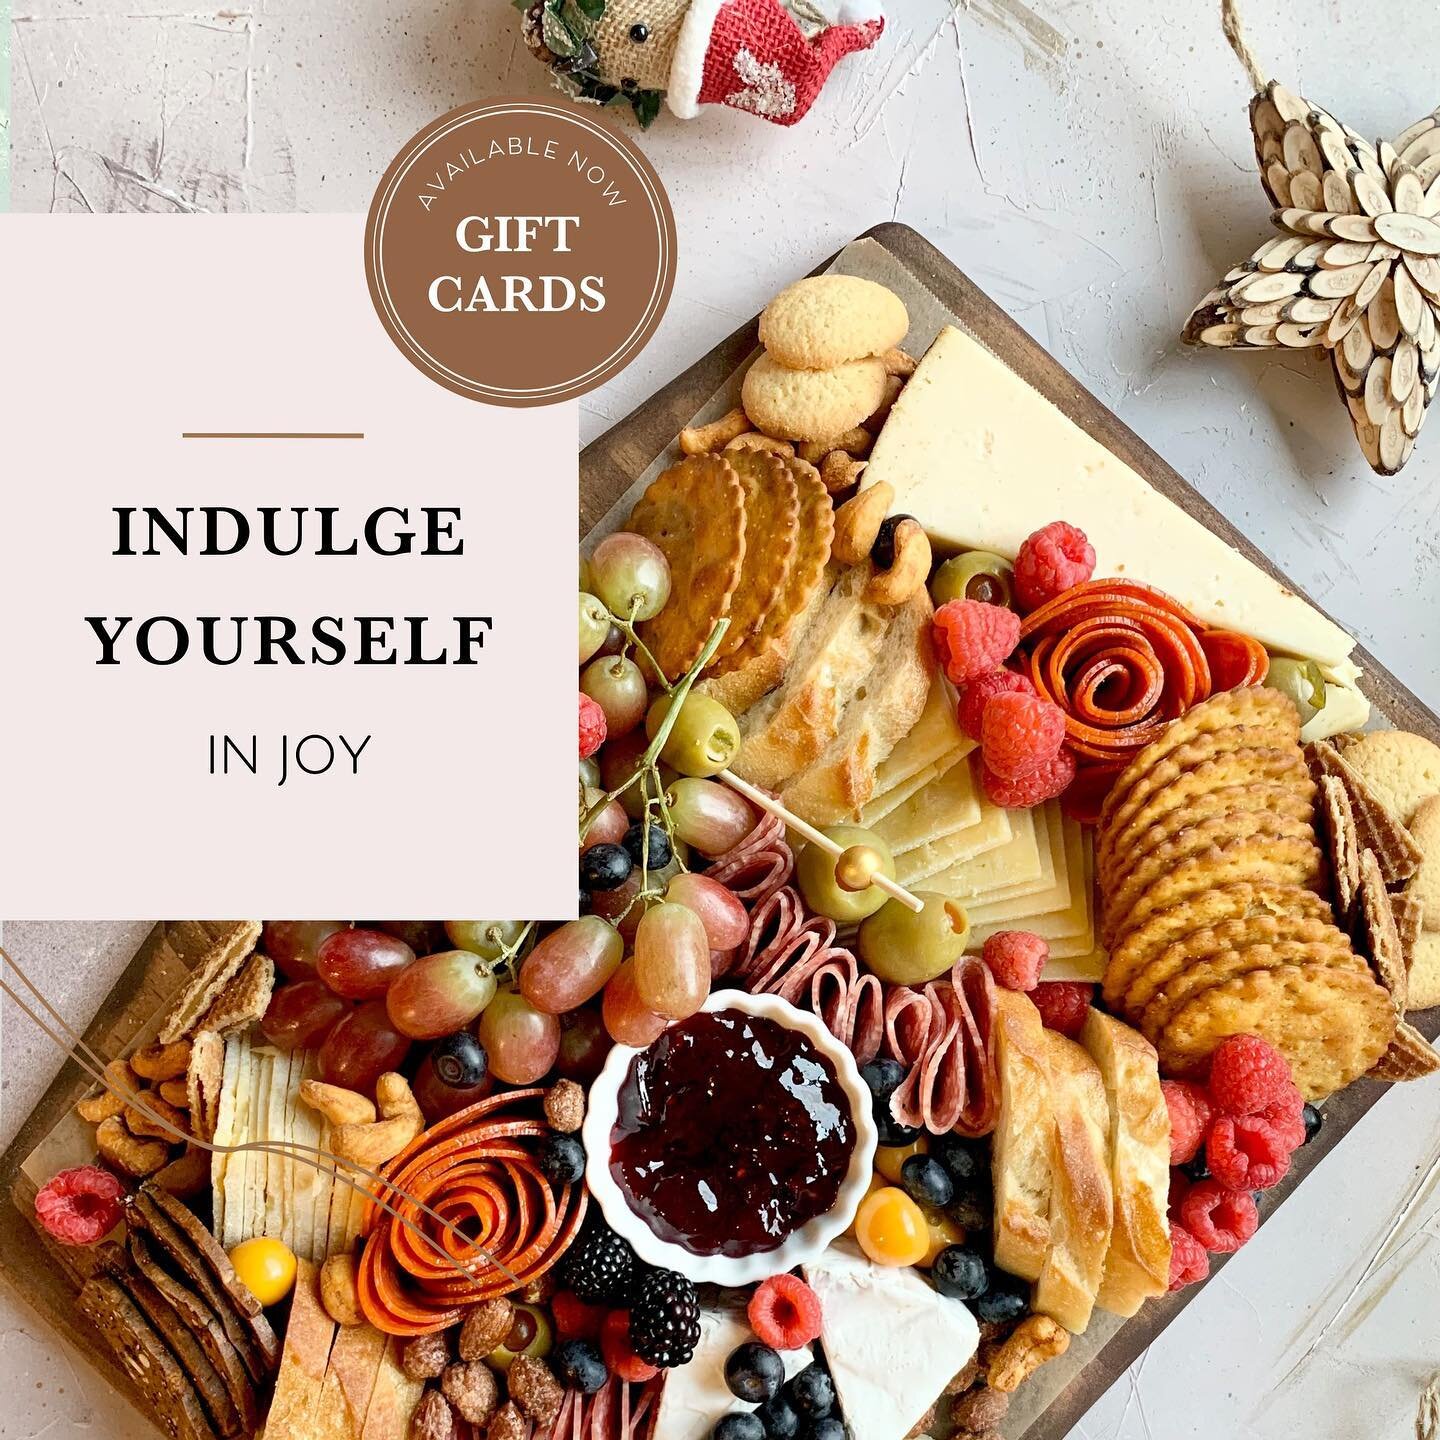 ⁠Indulge yourself...enough said 😉⁠⠀
⁠⠀
When you purchase a gift card this season your are gifting love, happiness, and a belly full of good food. Don't think twice about 📧⁠⠀
⁠⠀
#sendlove #giftcard #egift #staysafe #virtualhug #bellyfull #foodislove